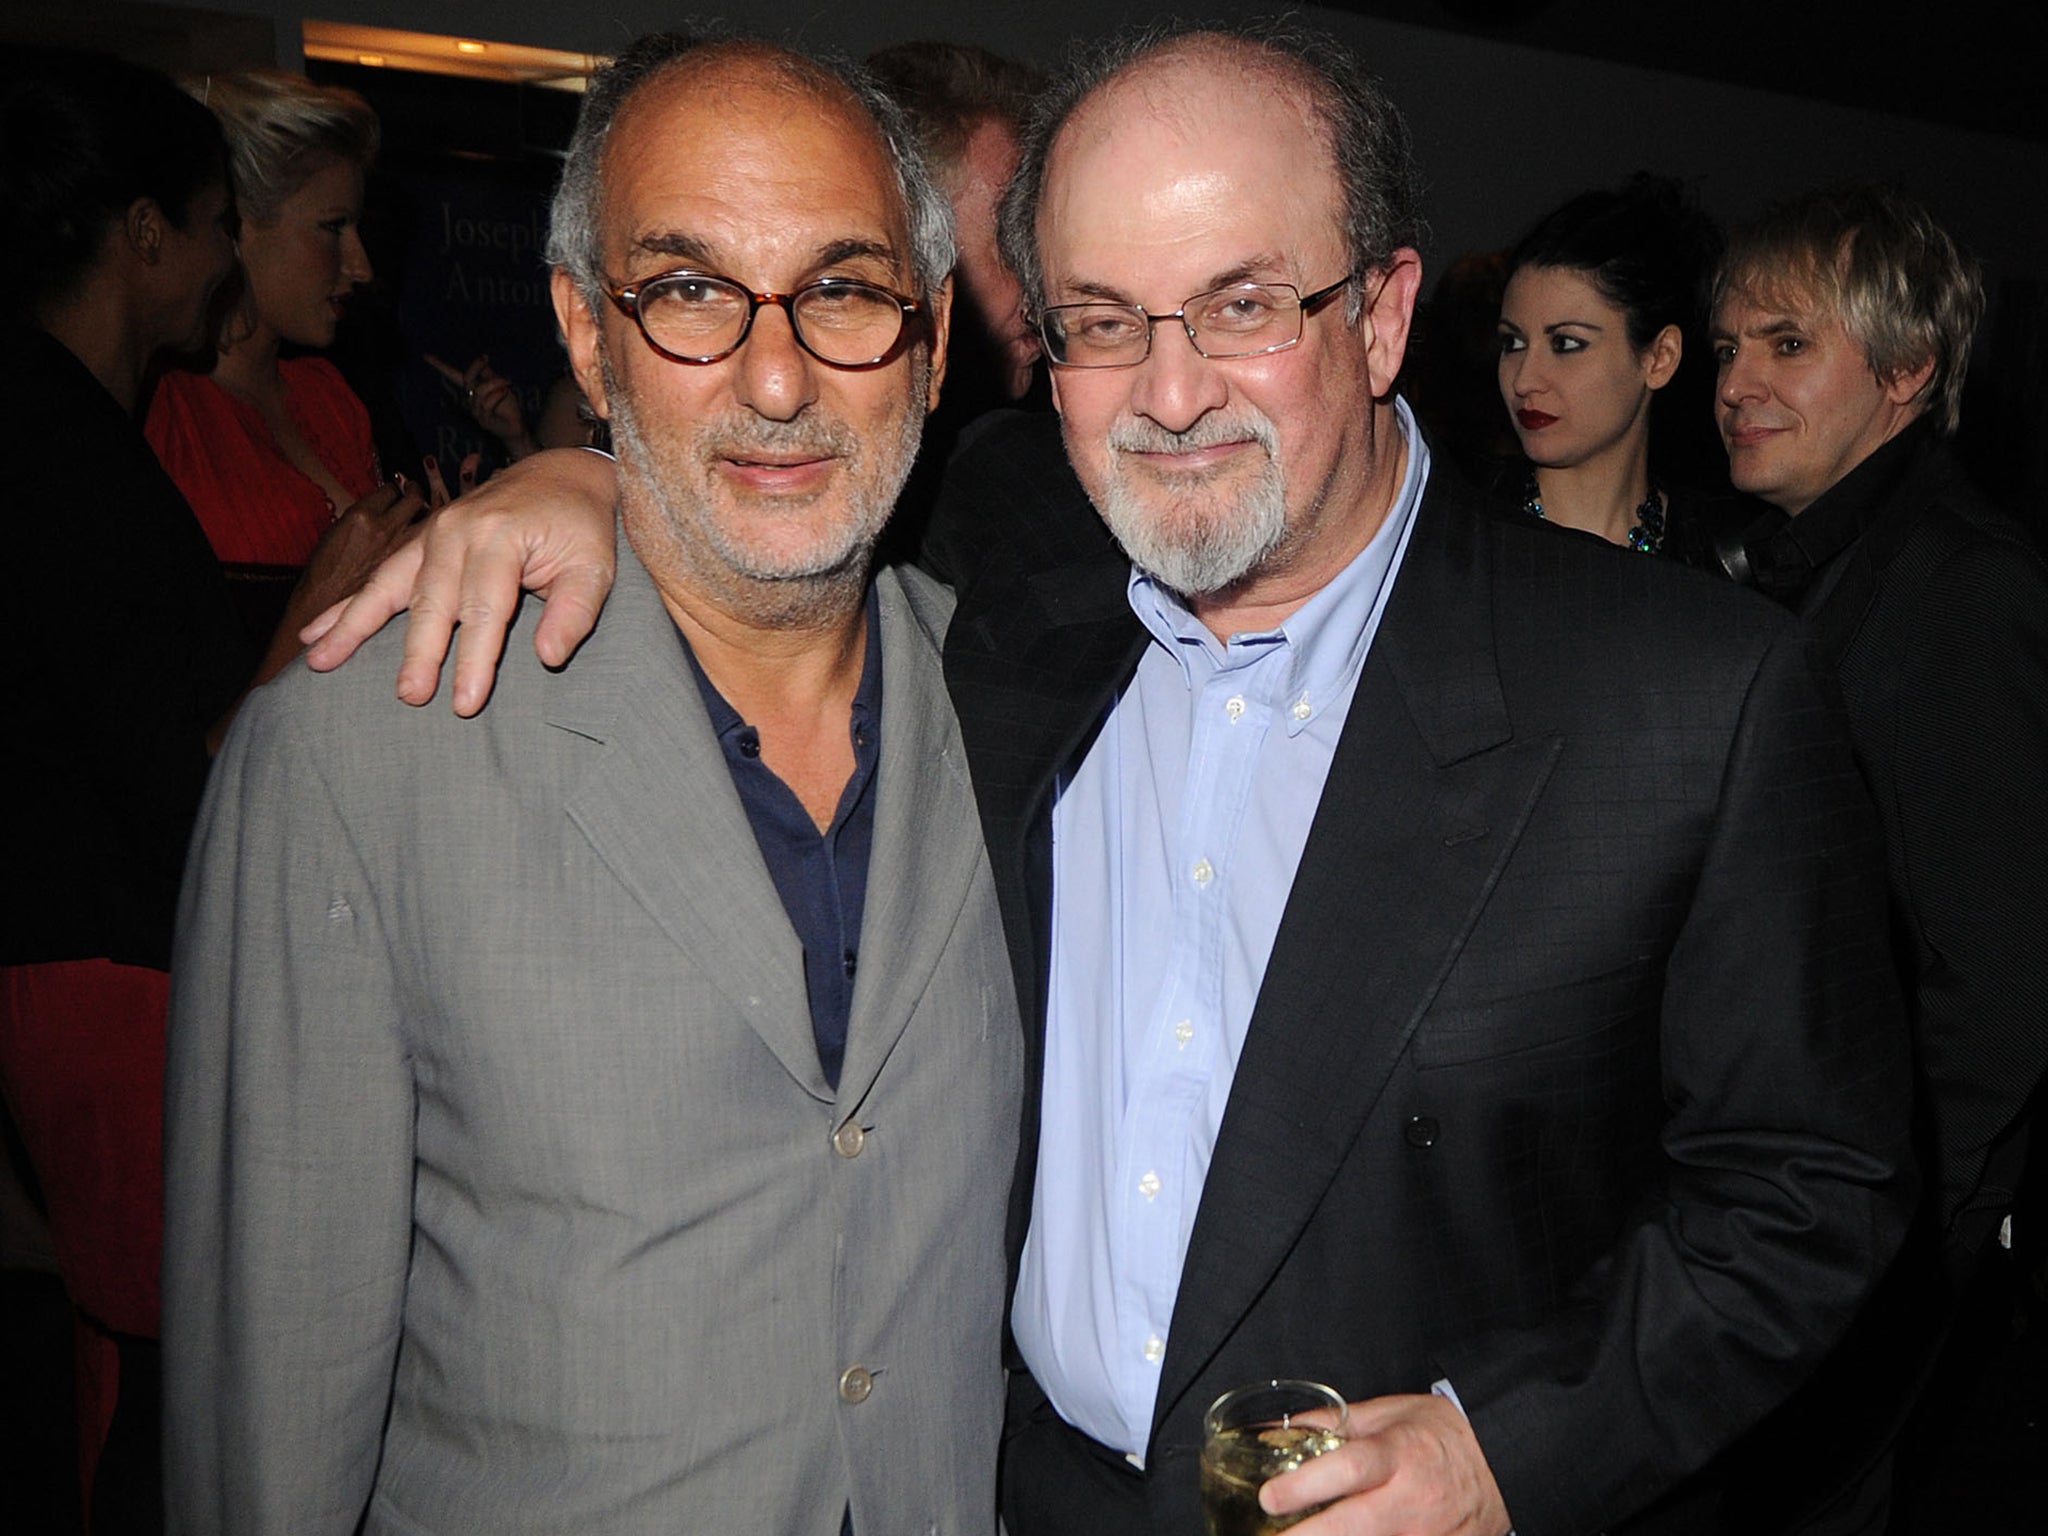 Alan Yentob (left) accused reporters of listenting to phone messages left by the novelist Salman Rushdie among others